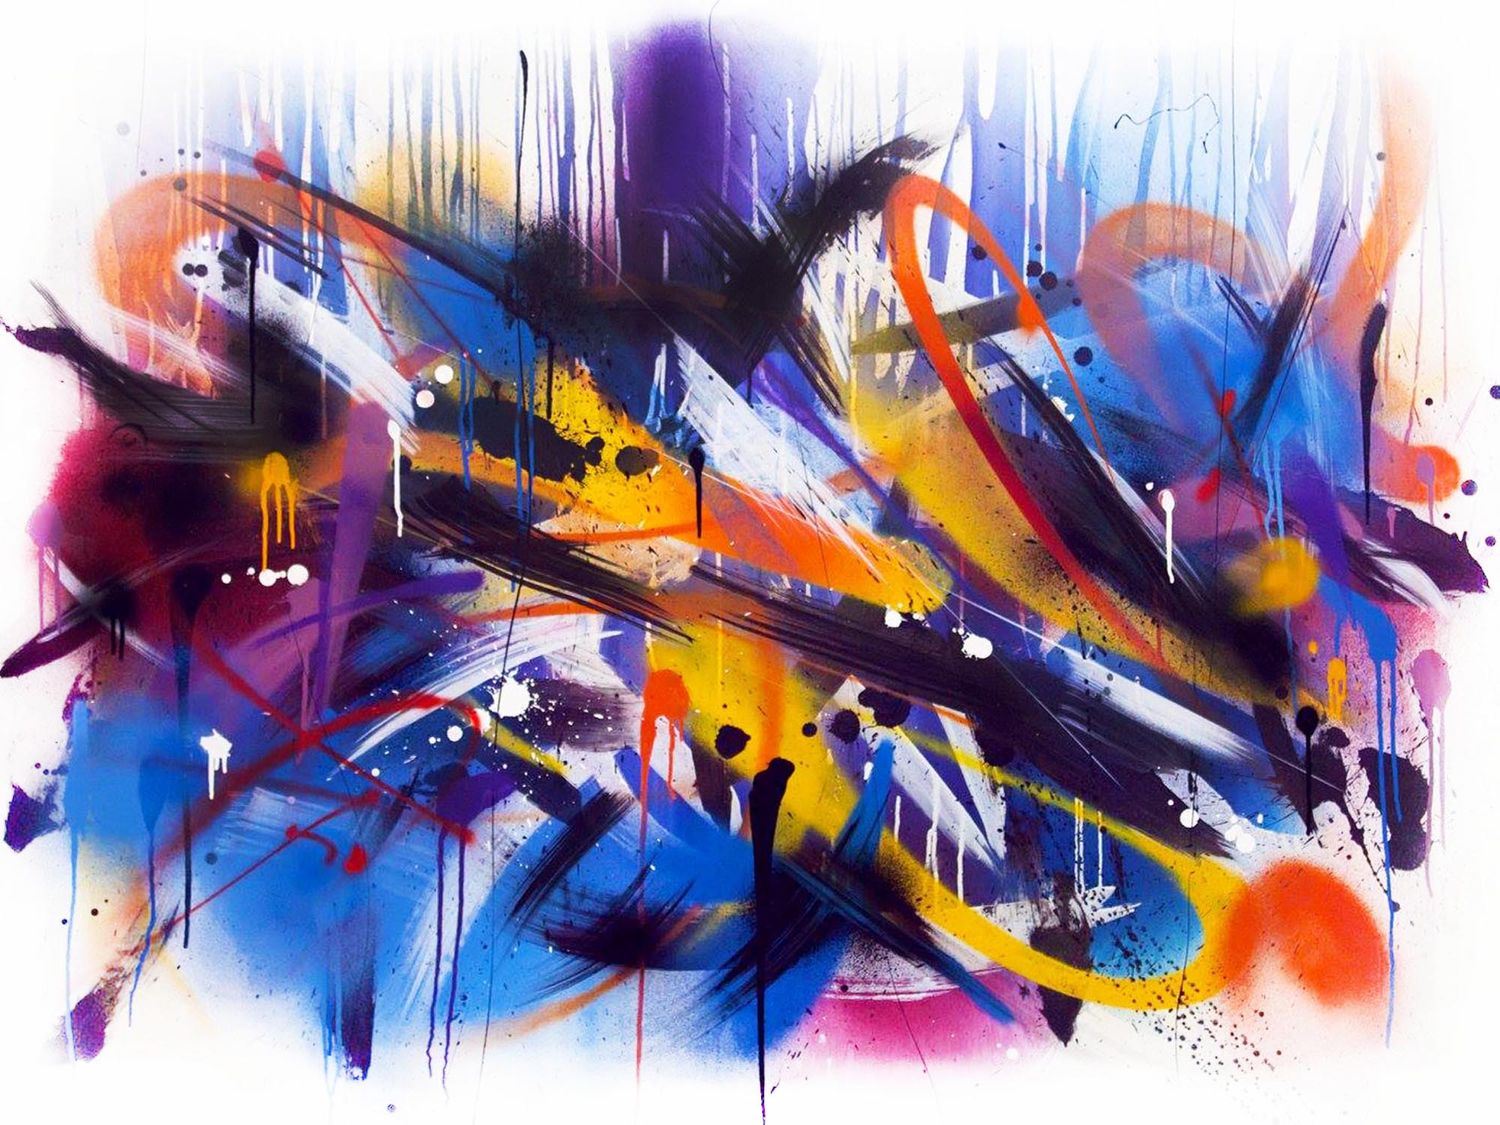 Fueled by graffiti, the abstract paintings from Emanuele Vittorioso are like strong and colorful explosions. Such as for the artwork “Under Control” done a few years back which is a perfect example.